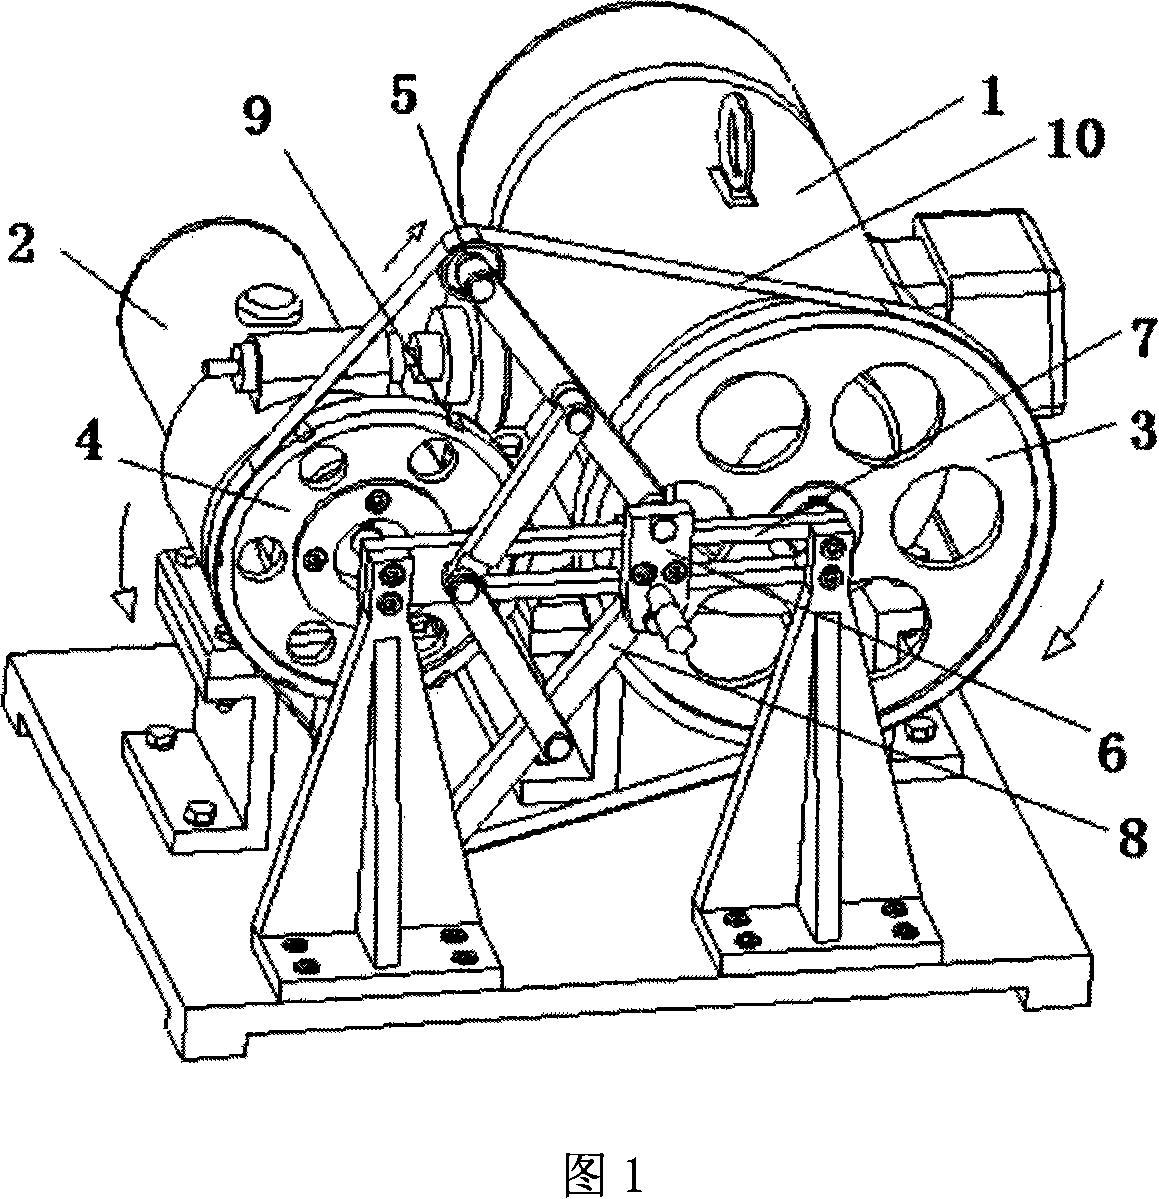 Device used for abrasive band frictional wear experiment